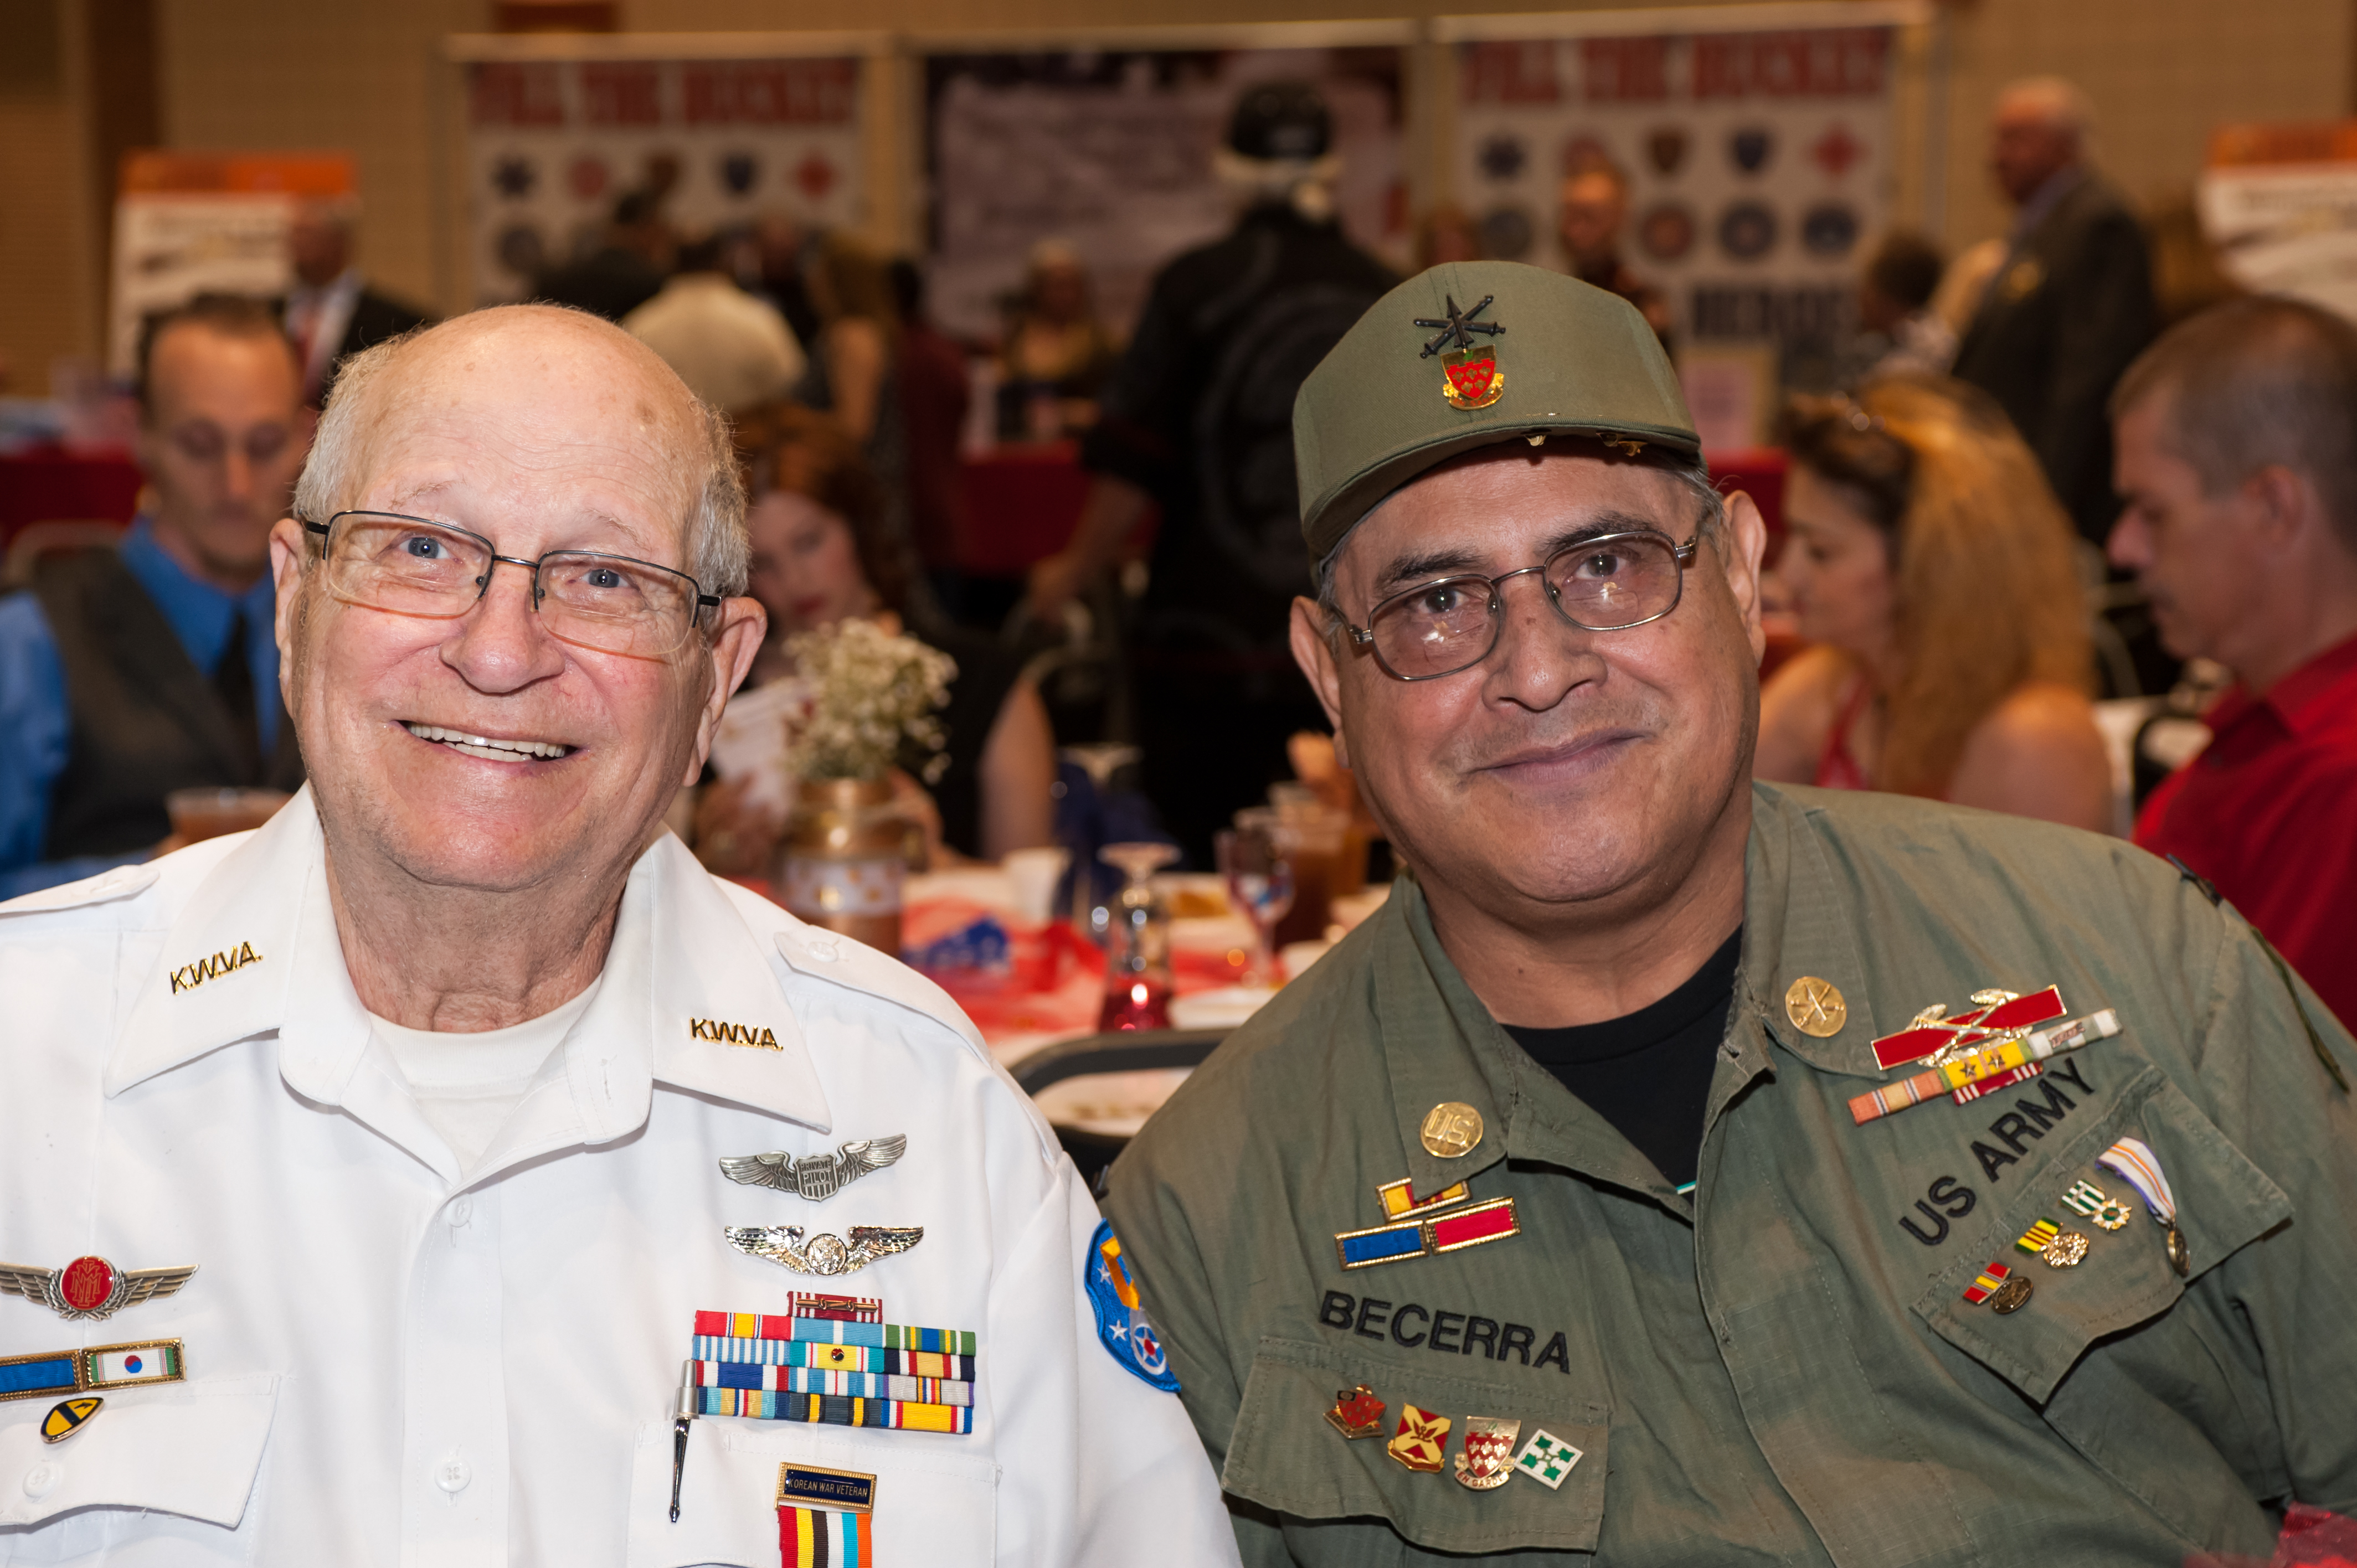 Shaie Williams for AGN Media. William Edwards and Sam Becerra at the Armed Forces Day Banquet  in Amarillo, TX Held at the Amarillo Civic Center on May 21, 2016.